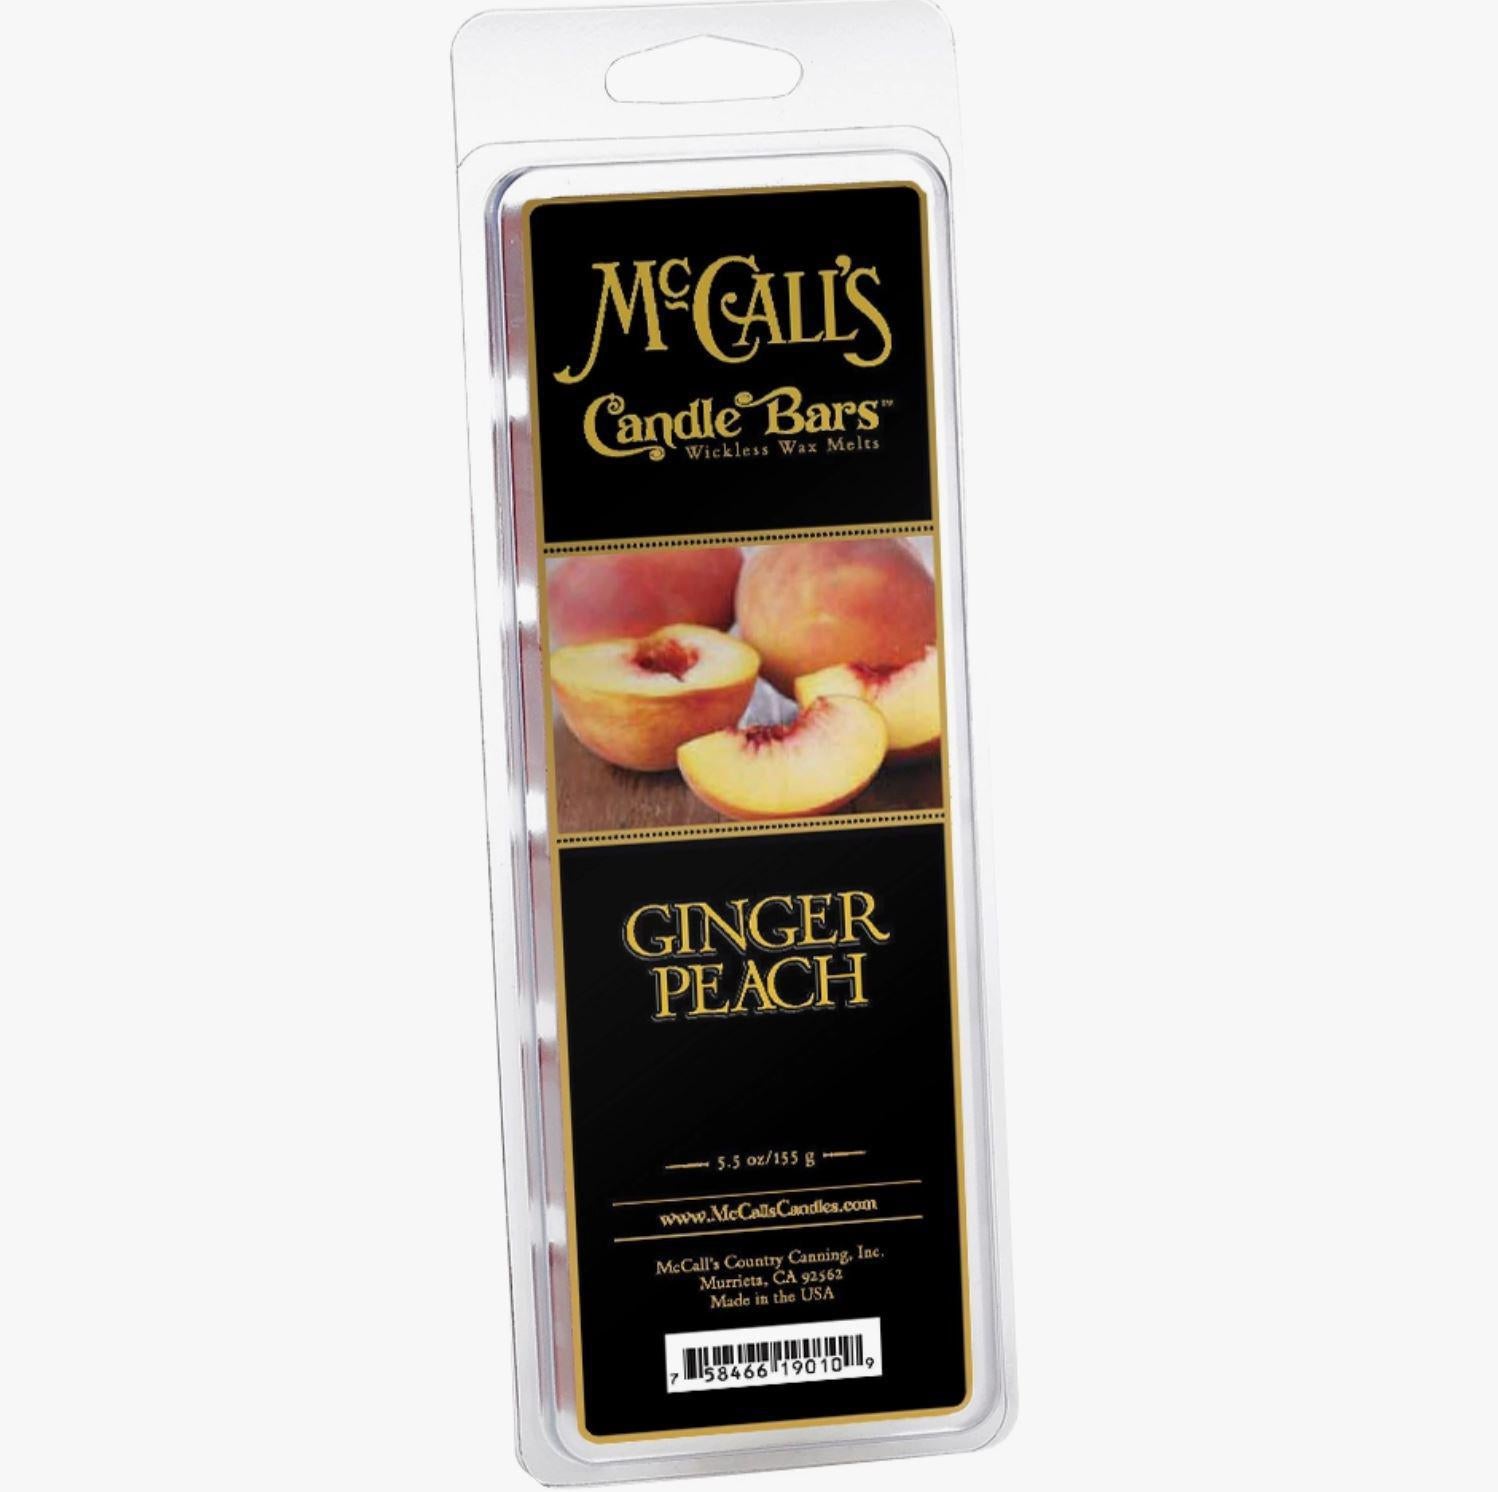 McCall's Candle Bars Wax Melts | Ginger Peach